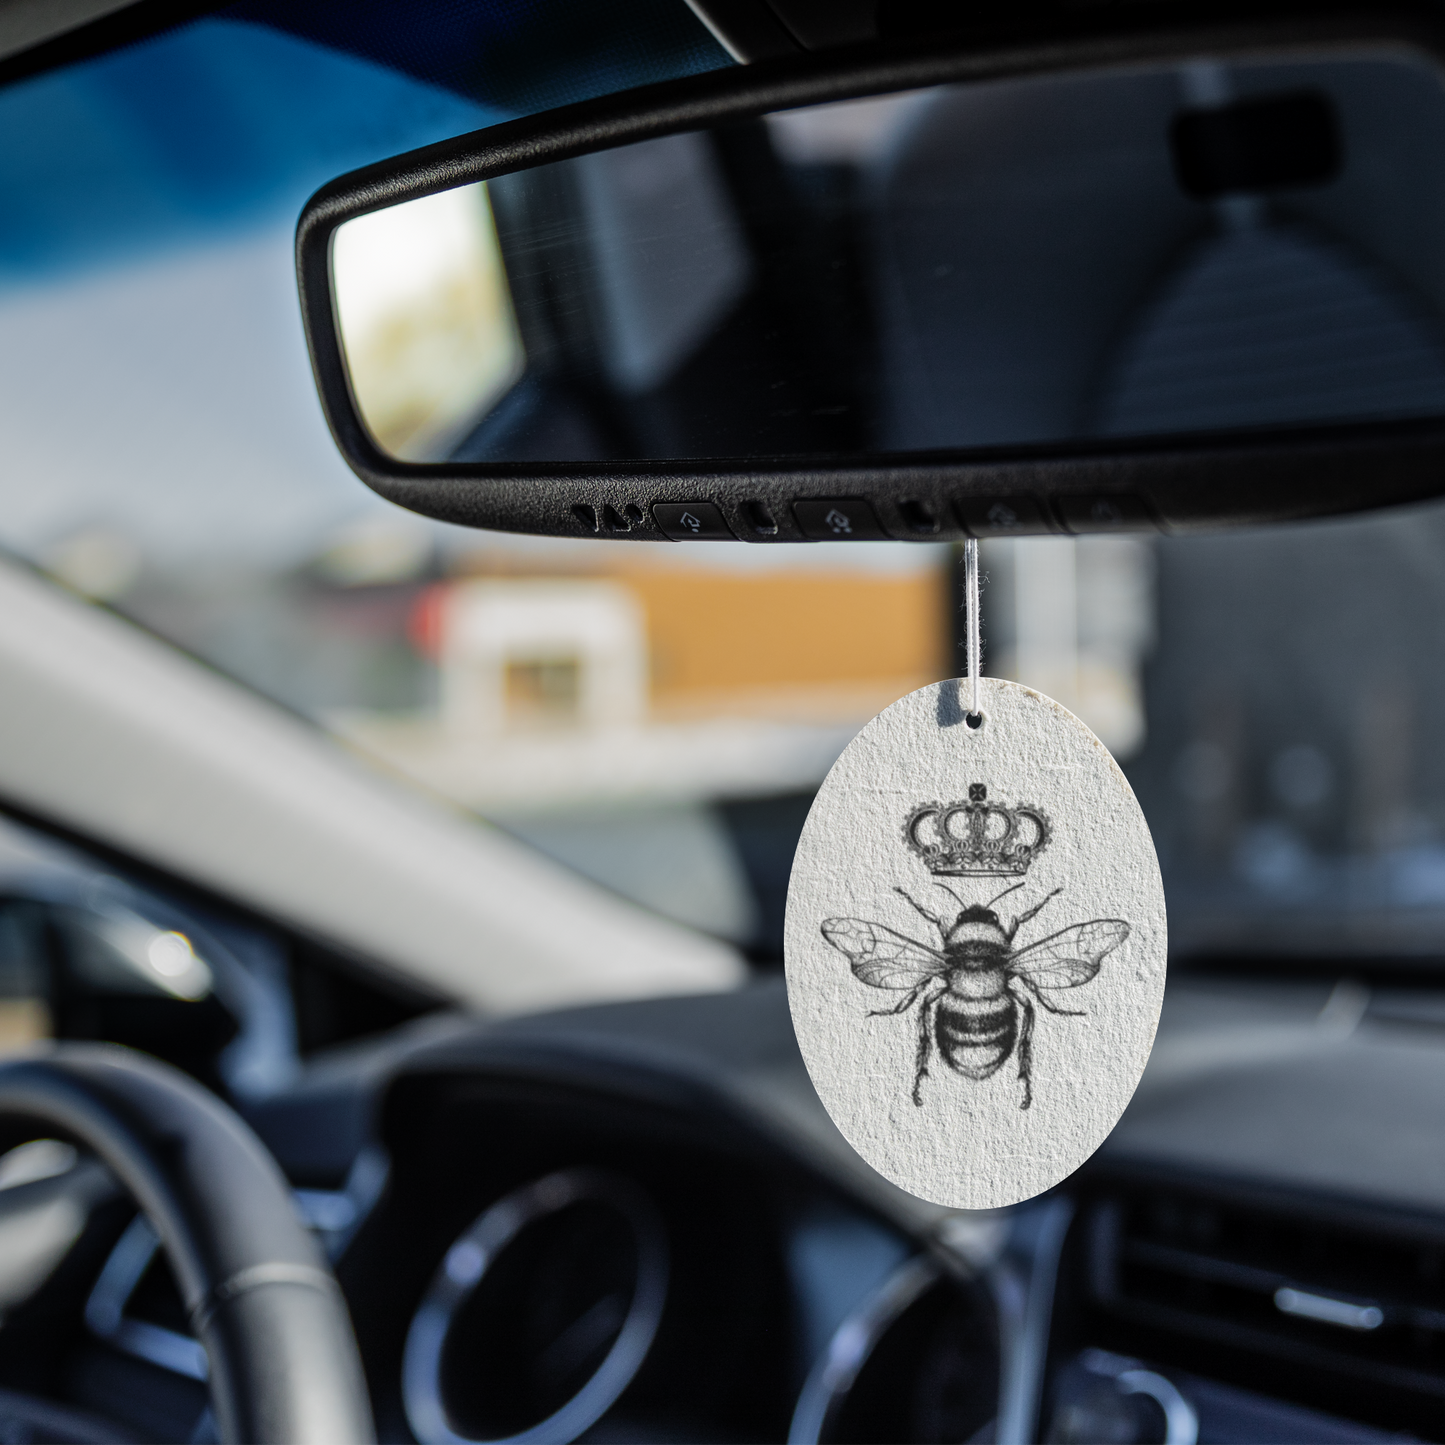 QB CLASSY QUEEN BEE LIMITED EDITION AIR FRESHENER 3 PACK